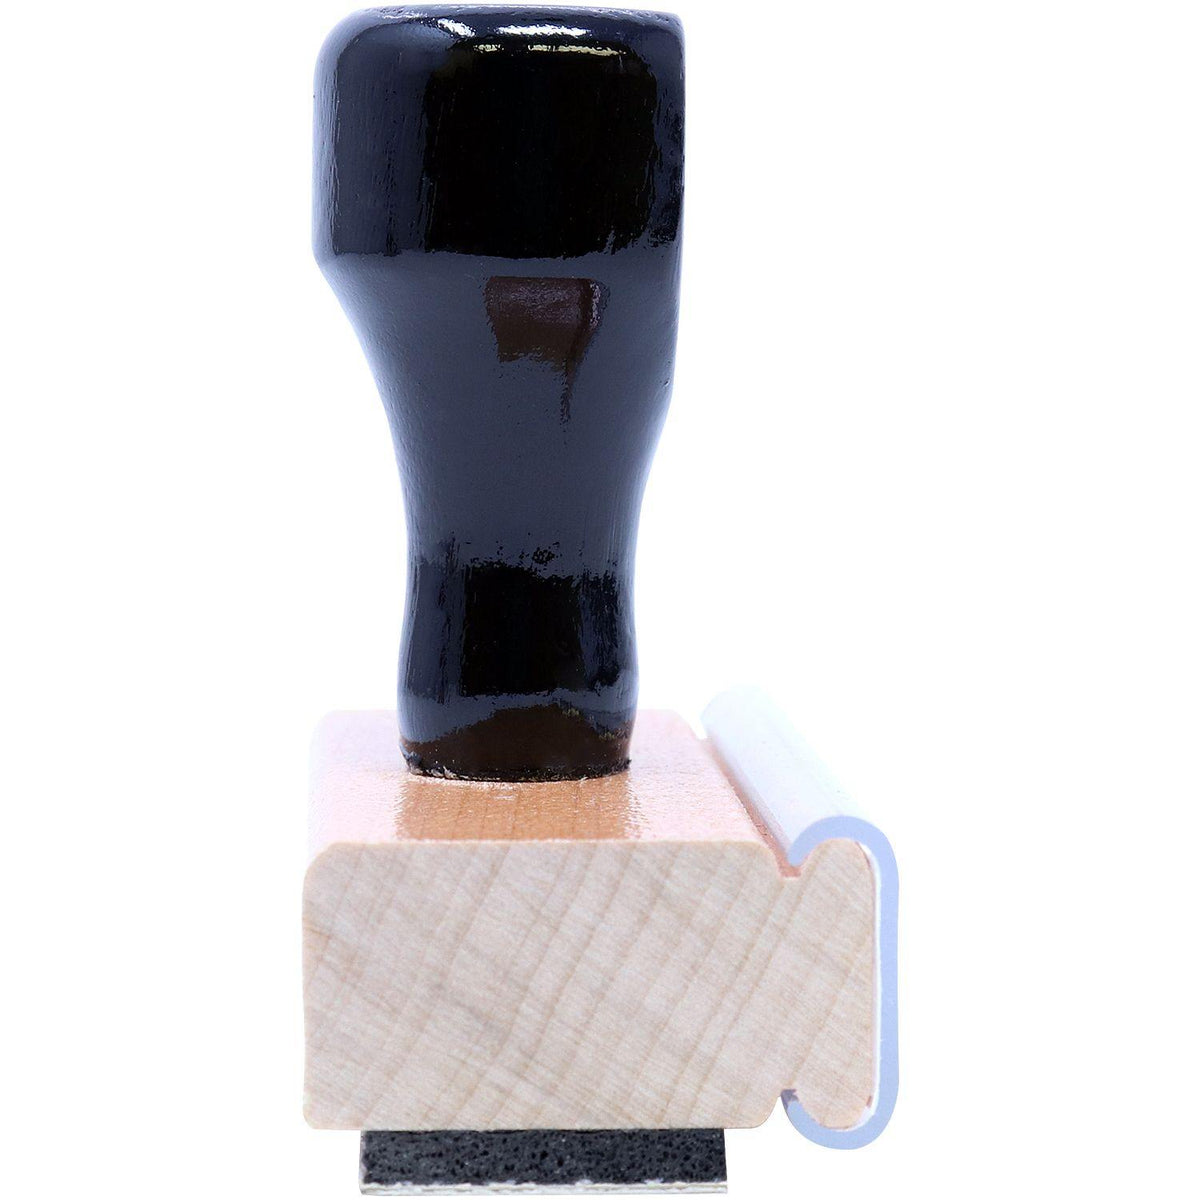 Large WOW Rubber Stamp - Engineer Seal Stamps - Brand_Acorn, Impression Size_Large, Stamp Type_Regular Stamp, Type of Use_Teacher